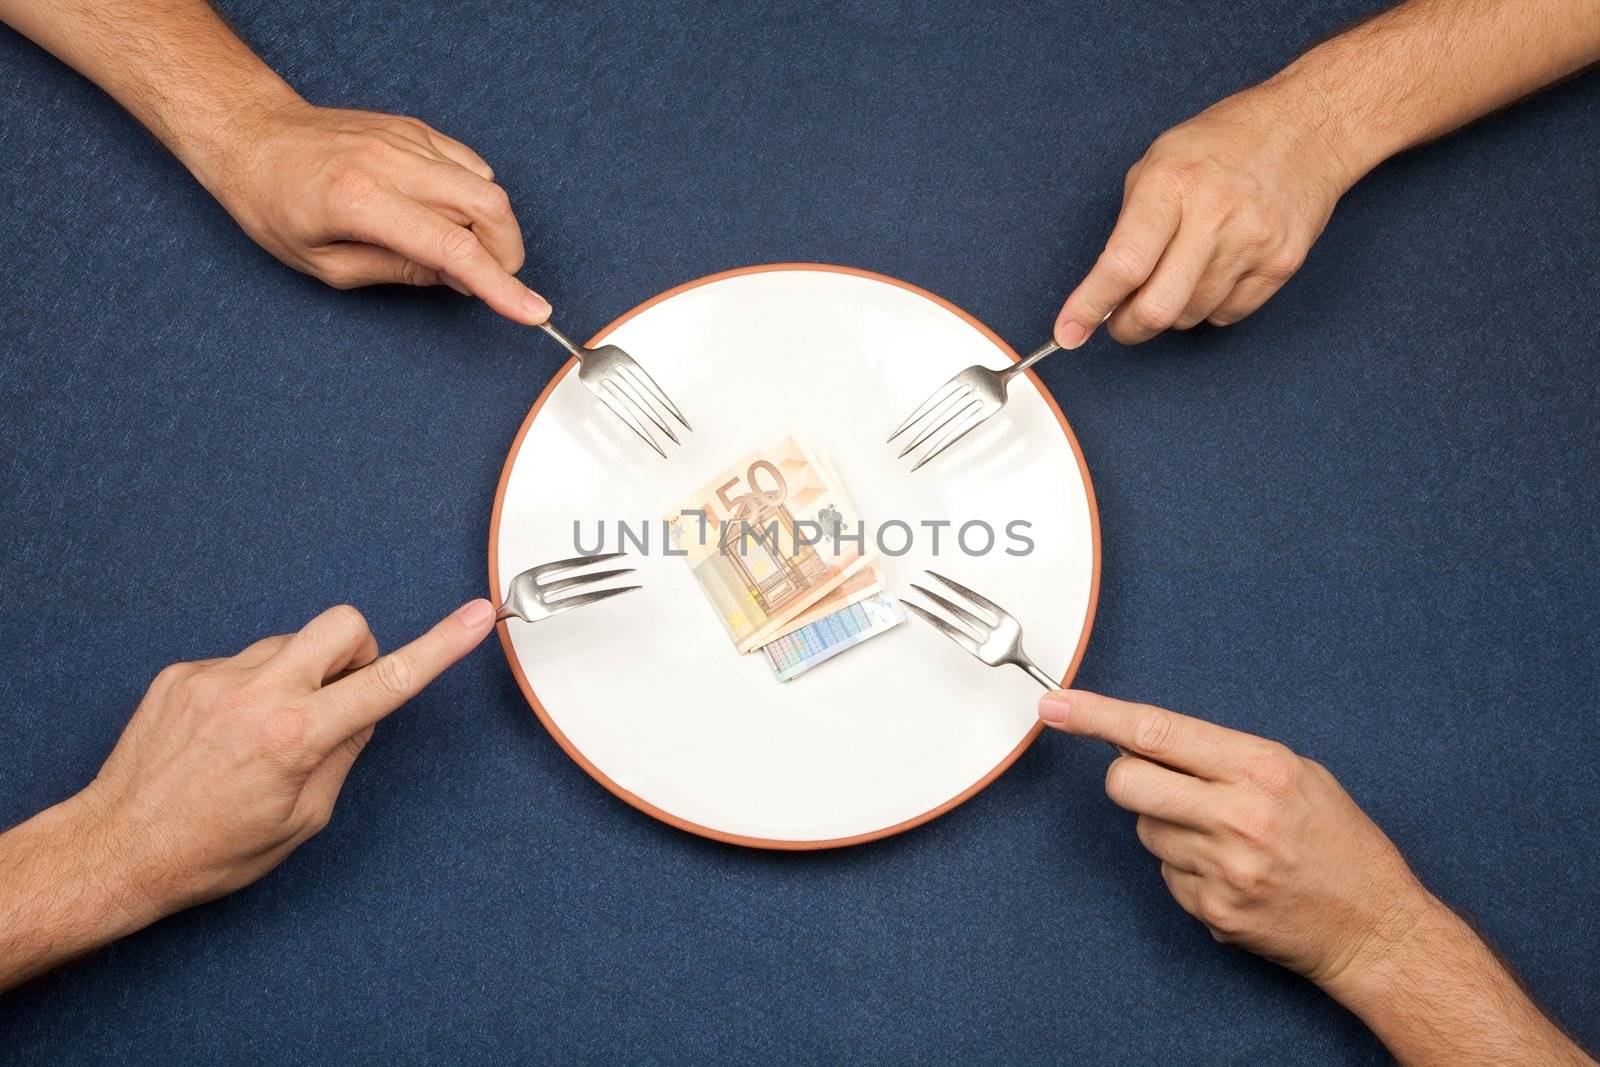 hand of man and wad of euros on white plate